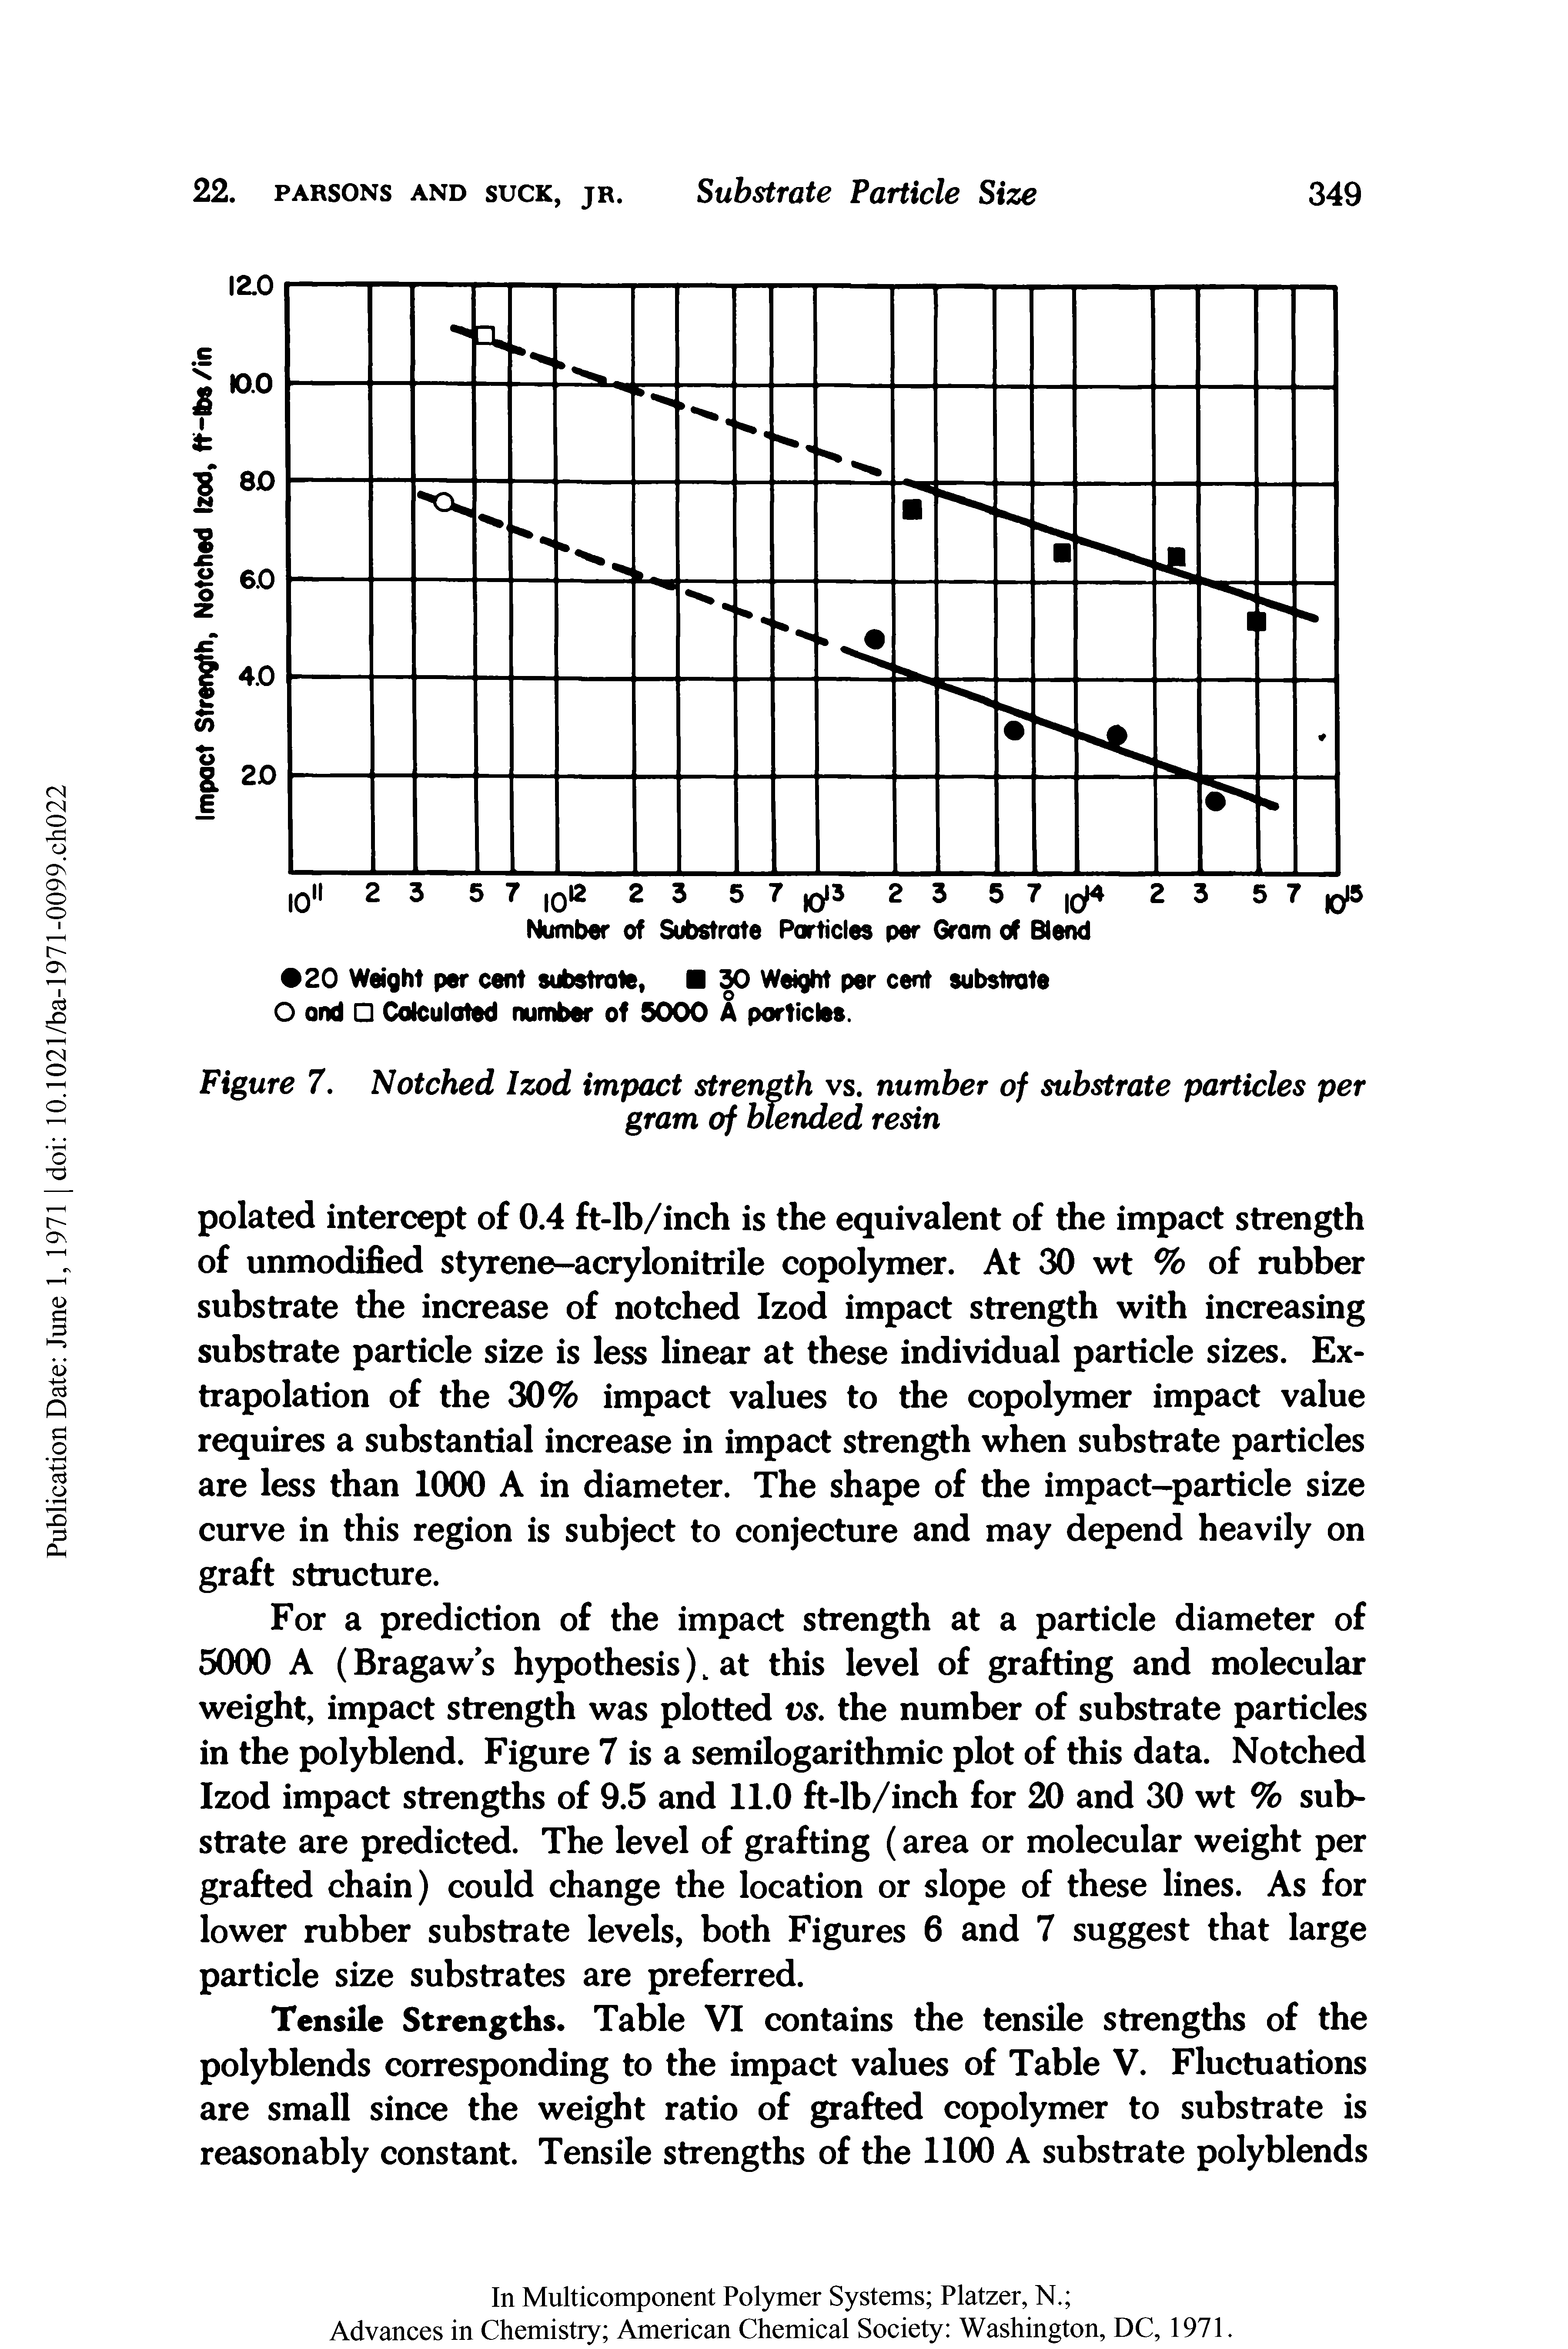 Figure 7. Notched Izod impact strength vs. number of substrate particles per...